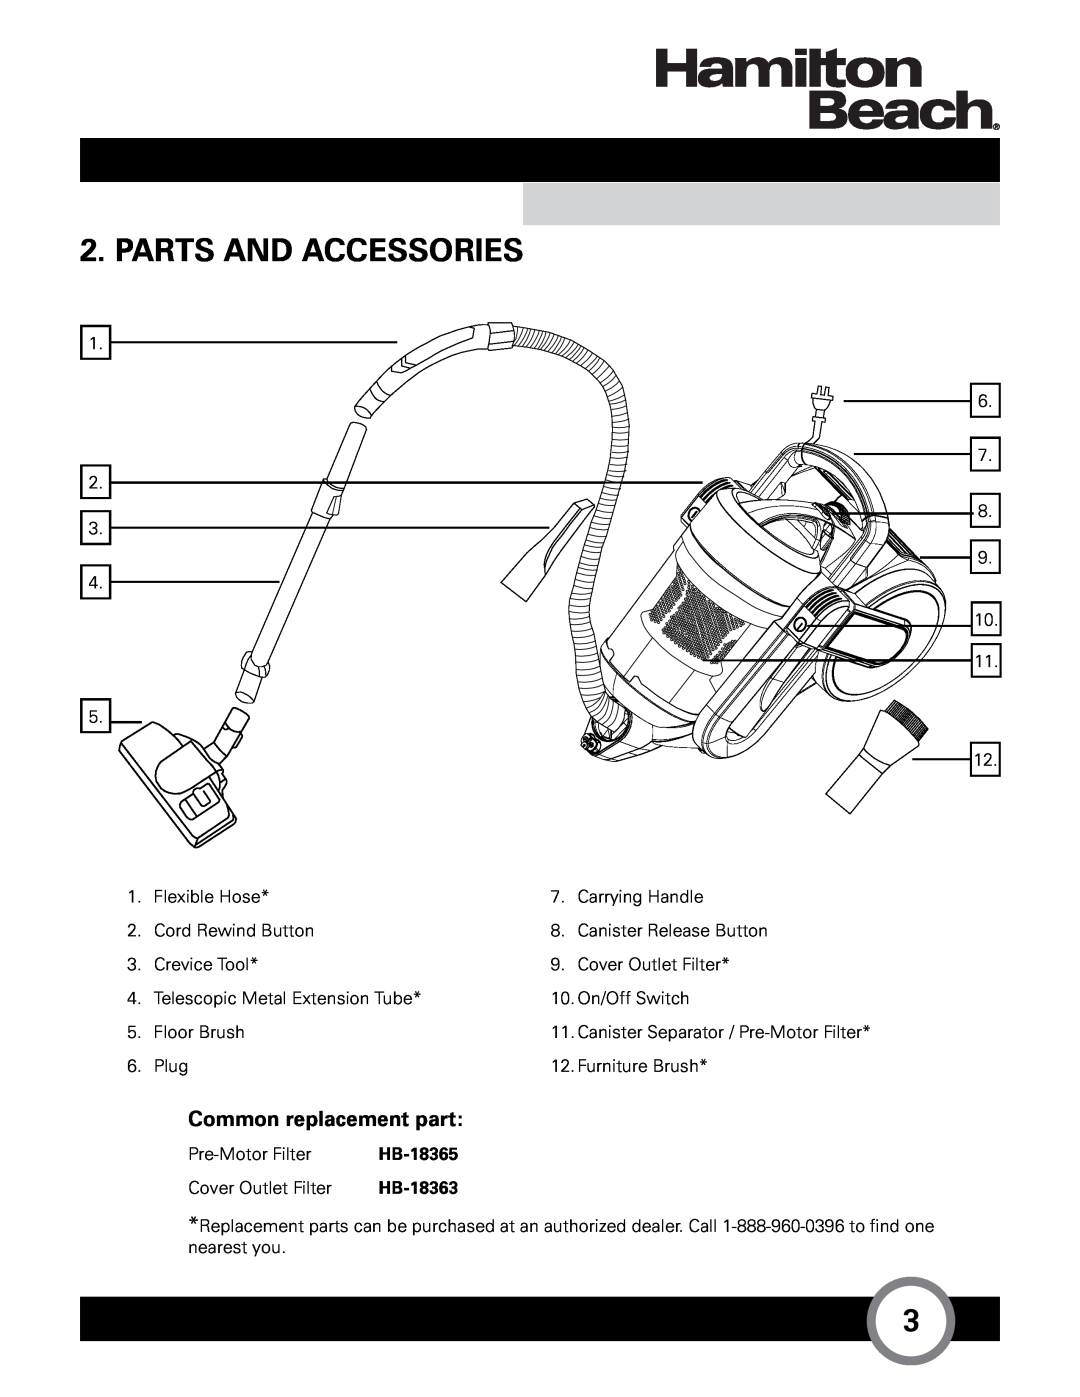 Hamilton Beach HB-363 owner manual Parts And Accessories, Common replacement part, HB-18365, HB-18363 